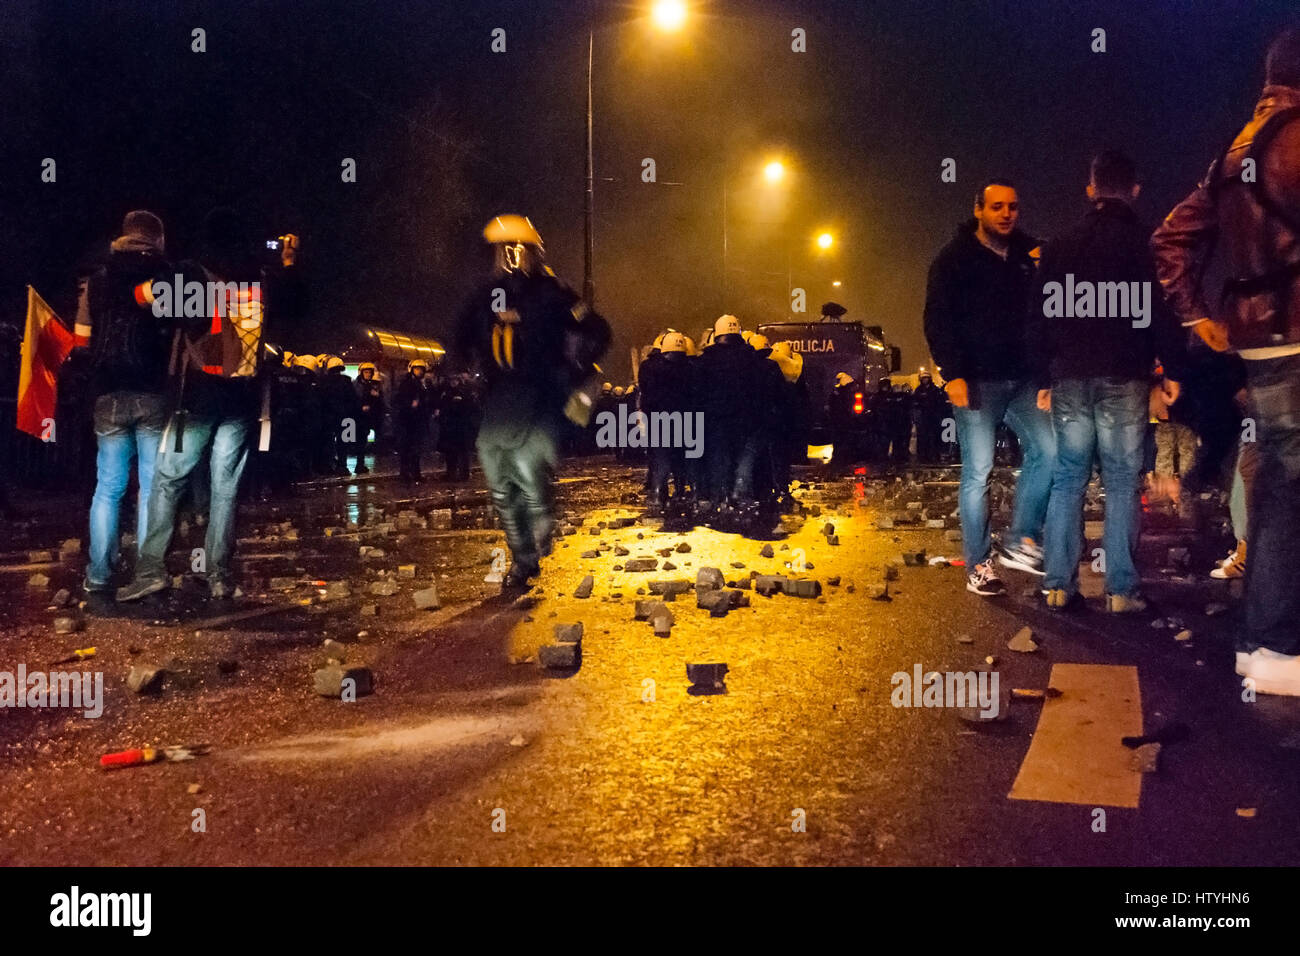 WARSAW, POLAND - NOVEMBER 11: Protests and riots at night during polish Independence day in Warsaw in November 11, 2014 Stock Photo